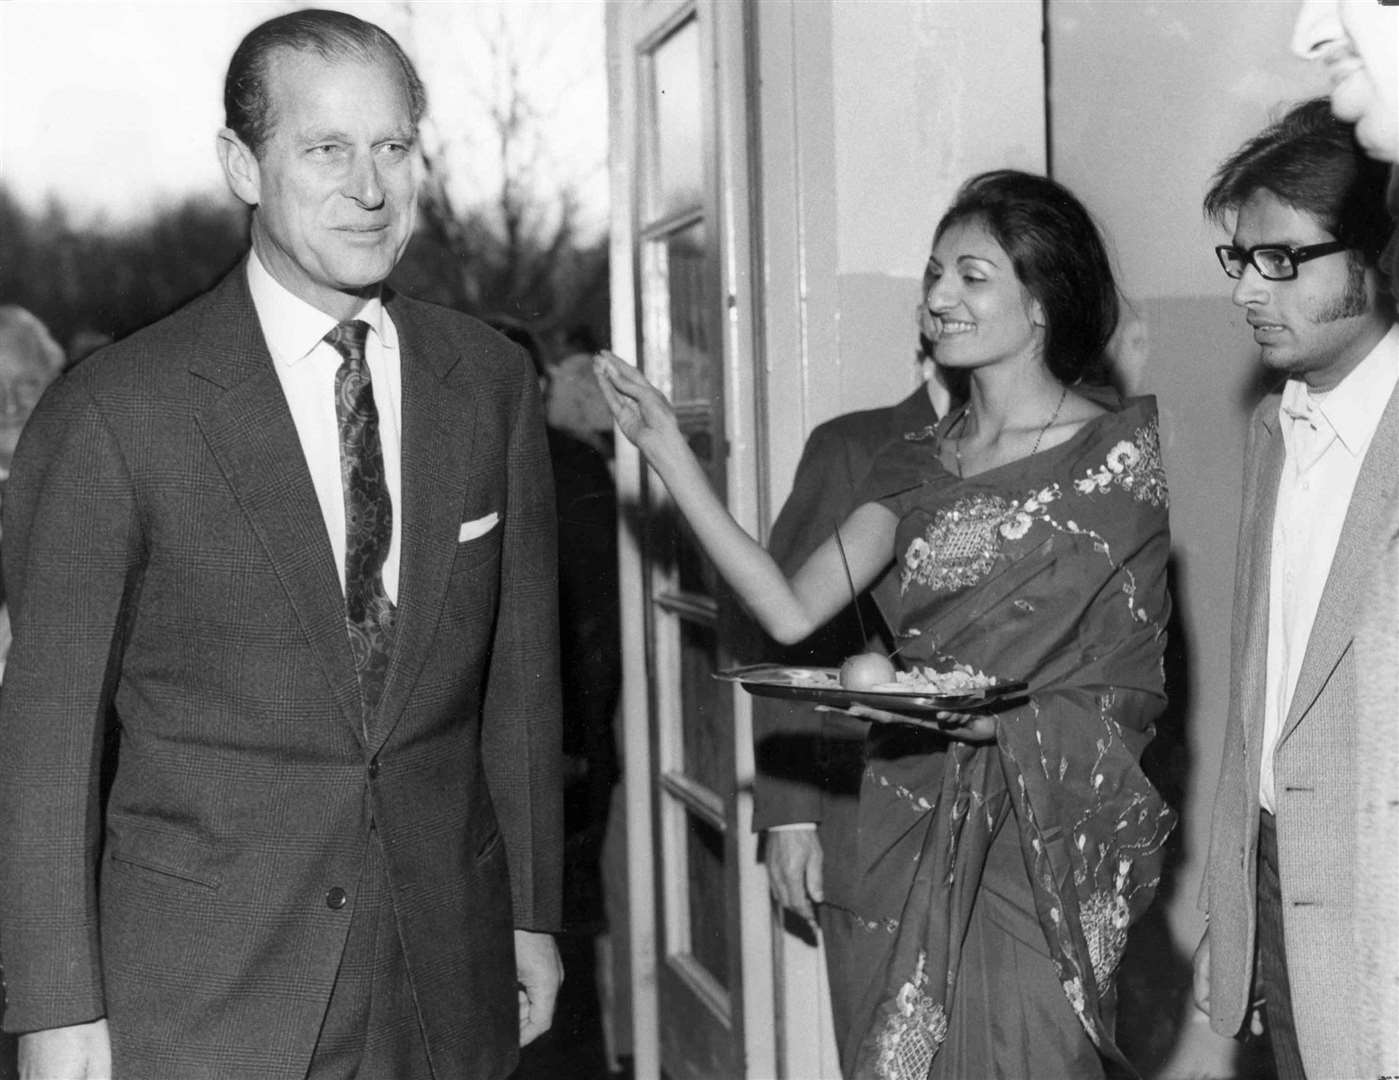 Madhvi Pattni showered the Duke of Edinburgh with rose petals and rice in a traditional Indian welcome to the Uganda Resettlement Centre in West Malling in November 1972. Mrs Pattni was one of the Asians expelled from Uganda by President Idi Amin